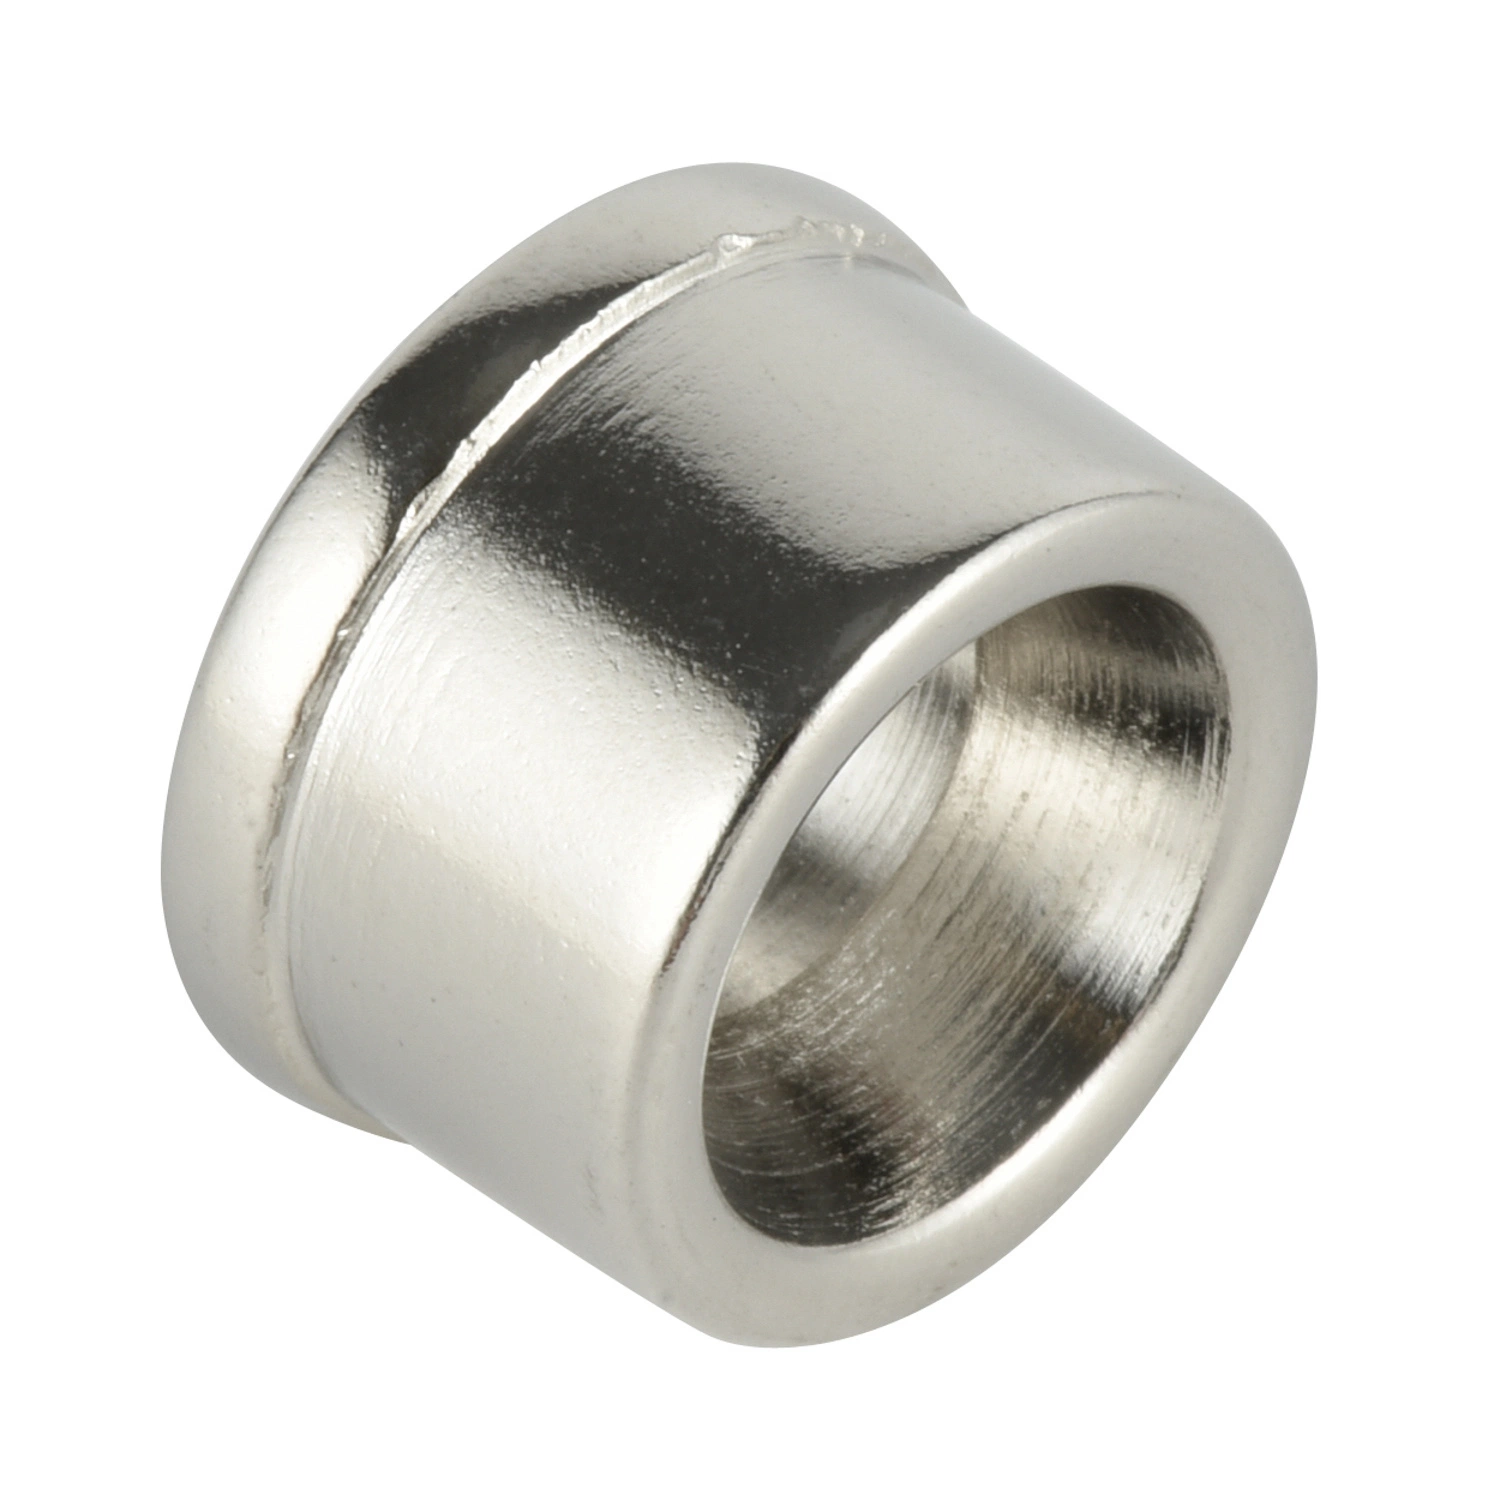 Super Strong Neodymium NdFeB Radial Ring Countersunk Hole Magnet